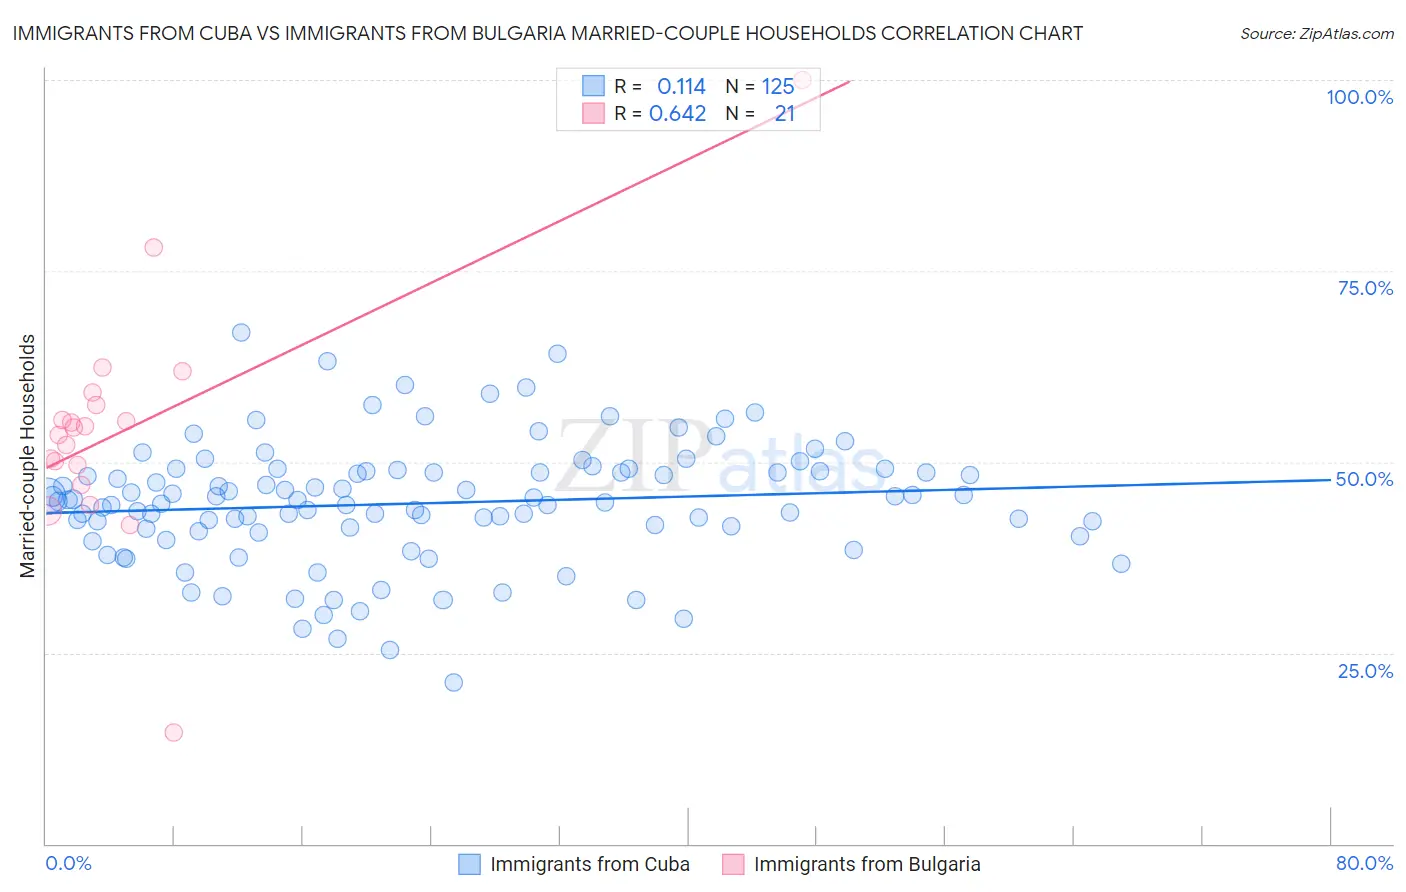 Immigrants from Cuba vs Immigrants from Bulgaria Married-couple Households